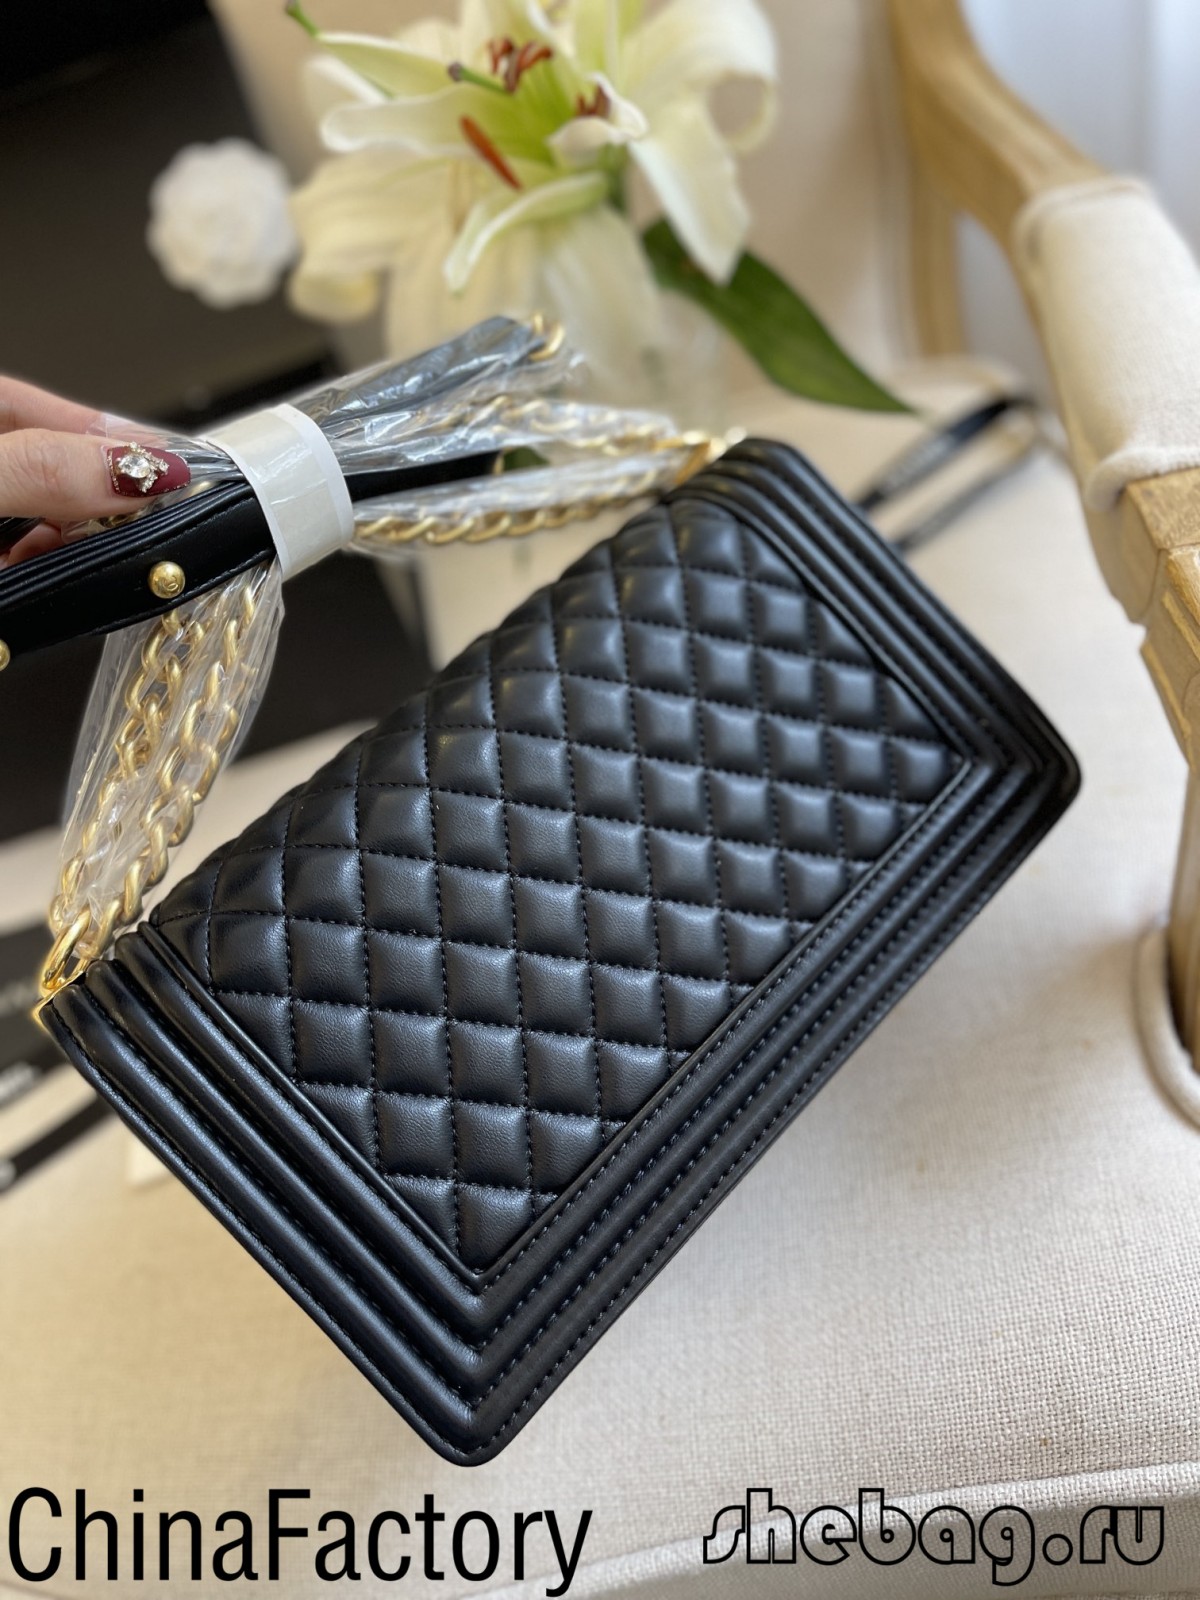 Best quality 2.55 Chanel bag replica sources in China (updated in 2022)-Best Quality Fake Louis Vuitton Bag Online Store, Replica designer bag ru